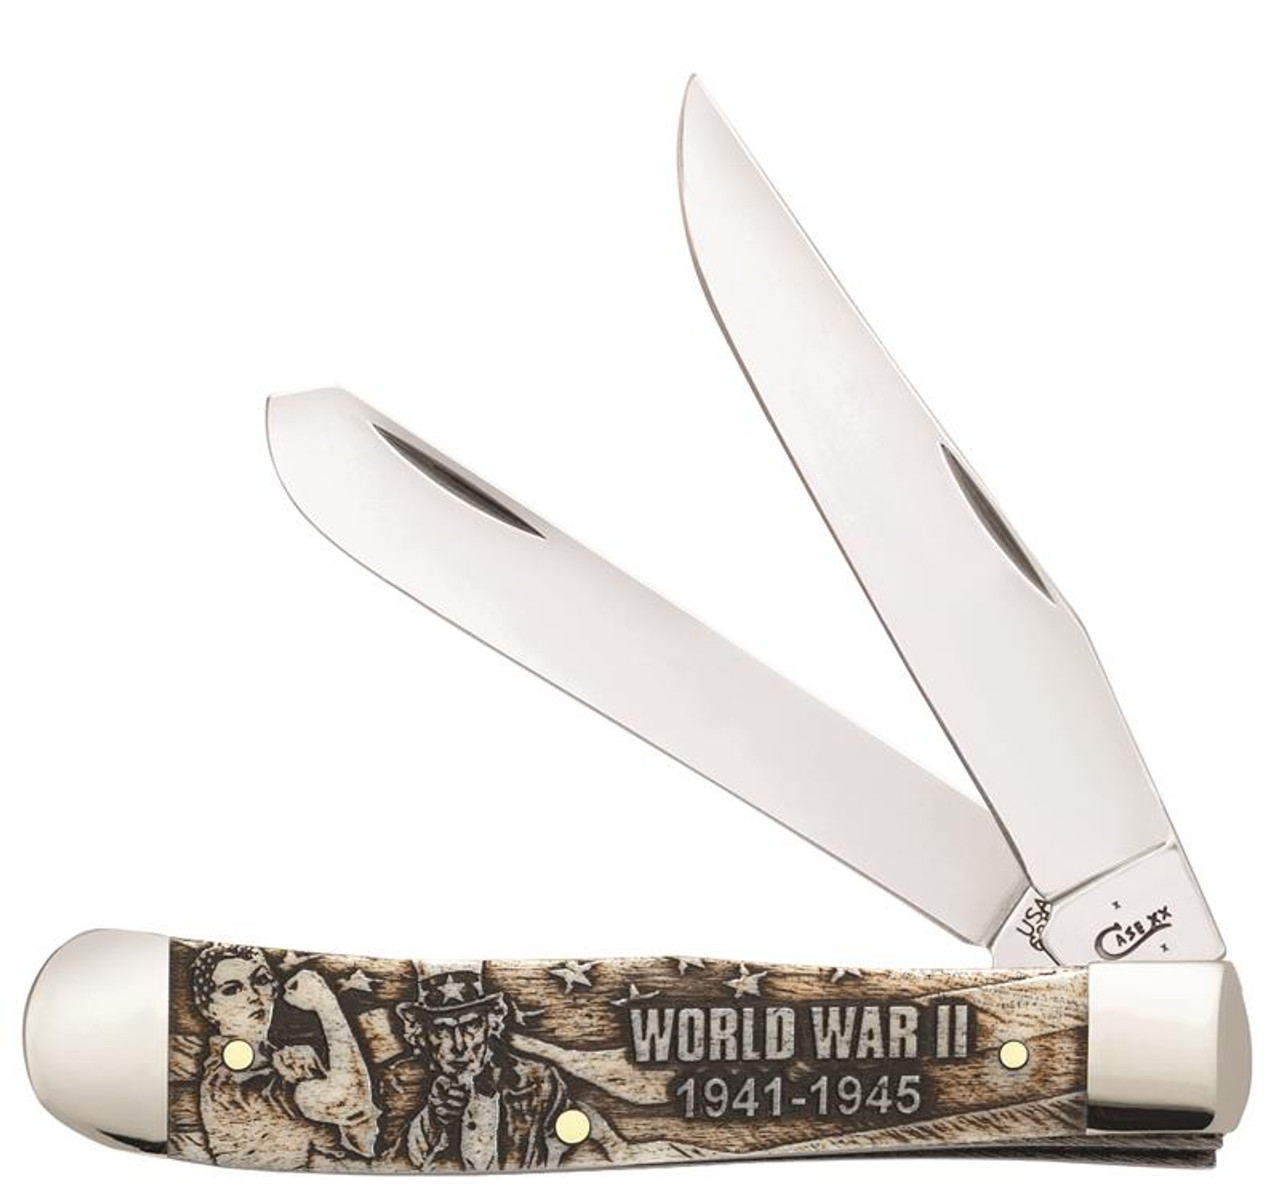 Case 22030 Trapper-WWII-Natural Bone Handle with Amber Color Wash